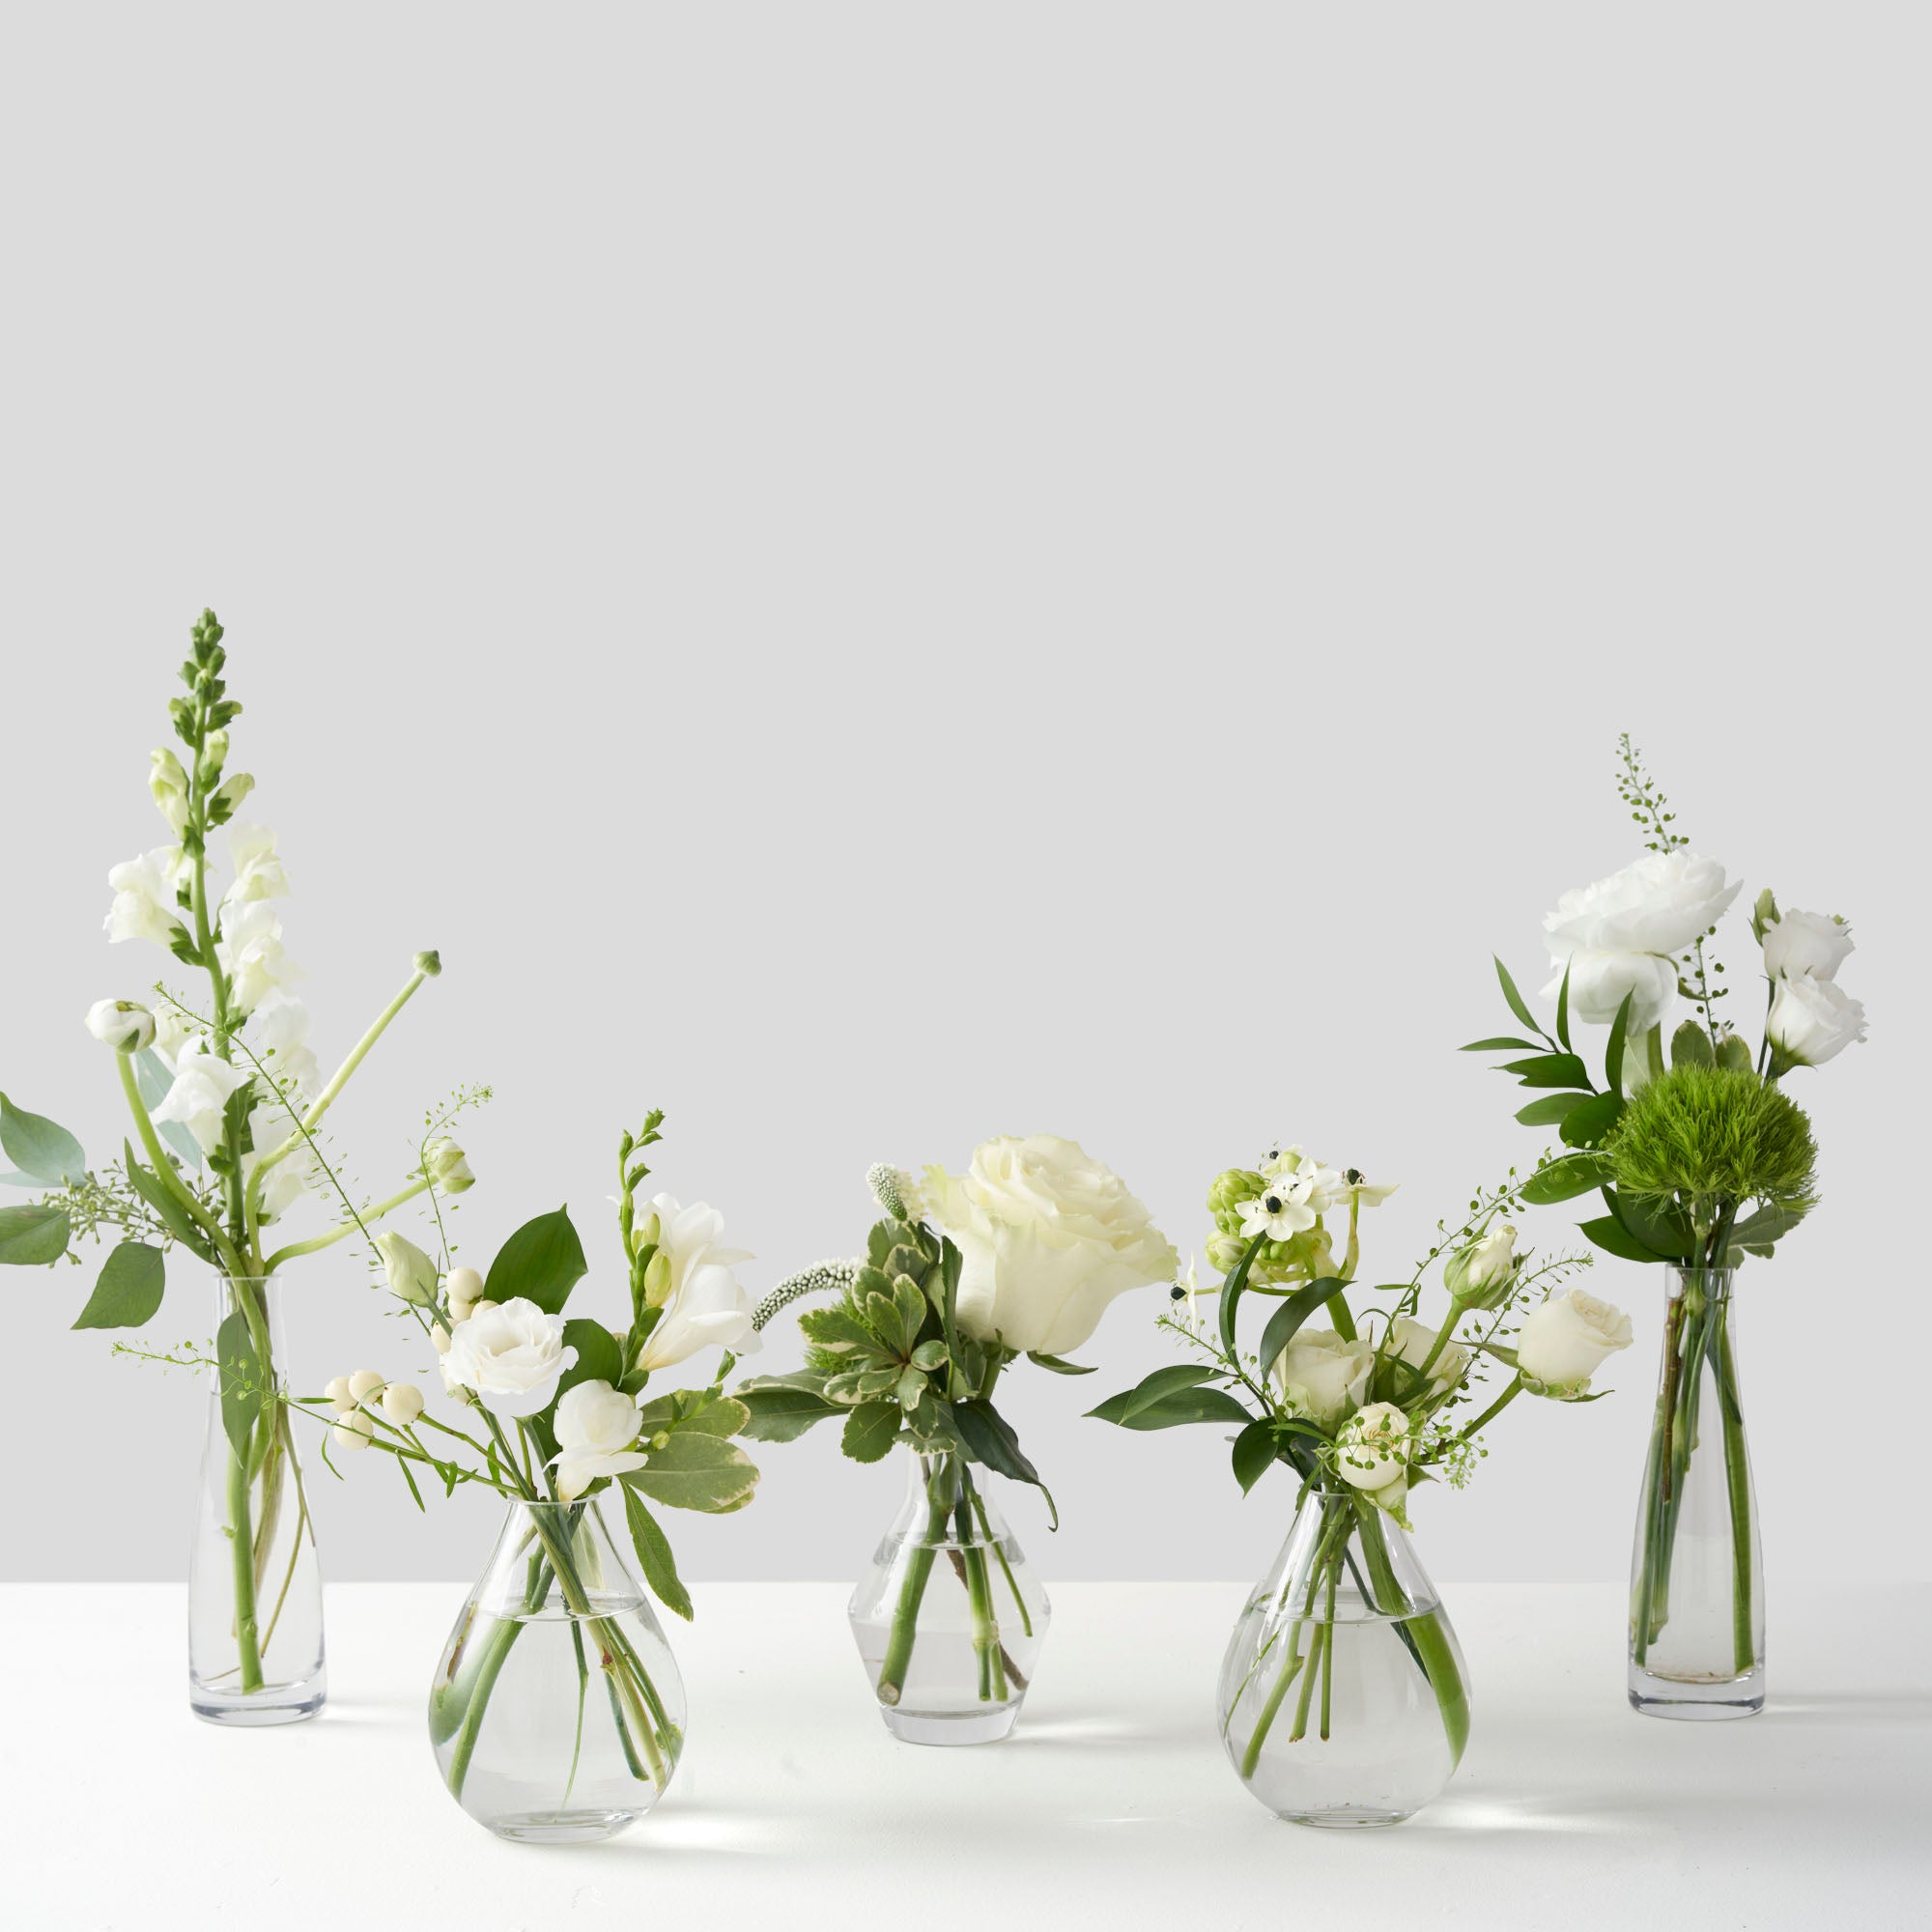 Five small glass vases filled with white and green flowers in a row on white background.